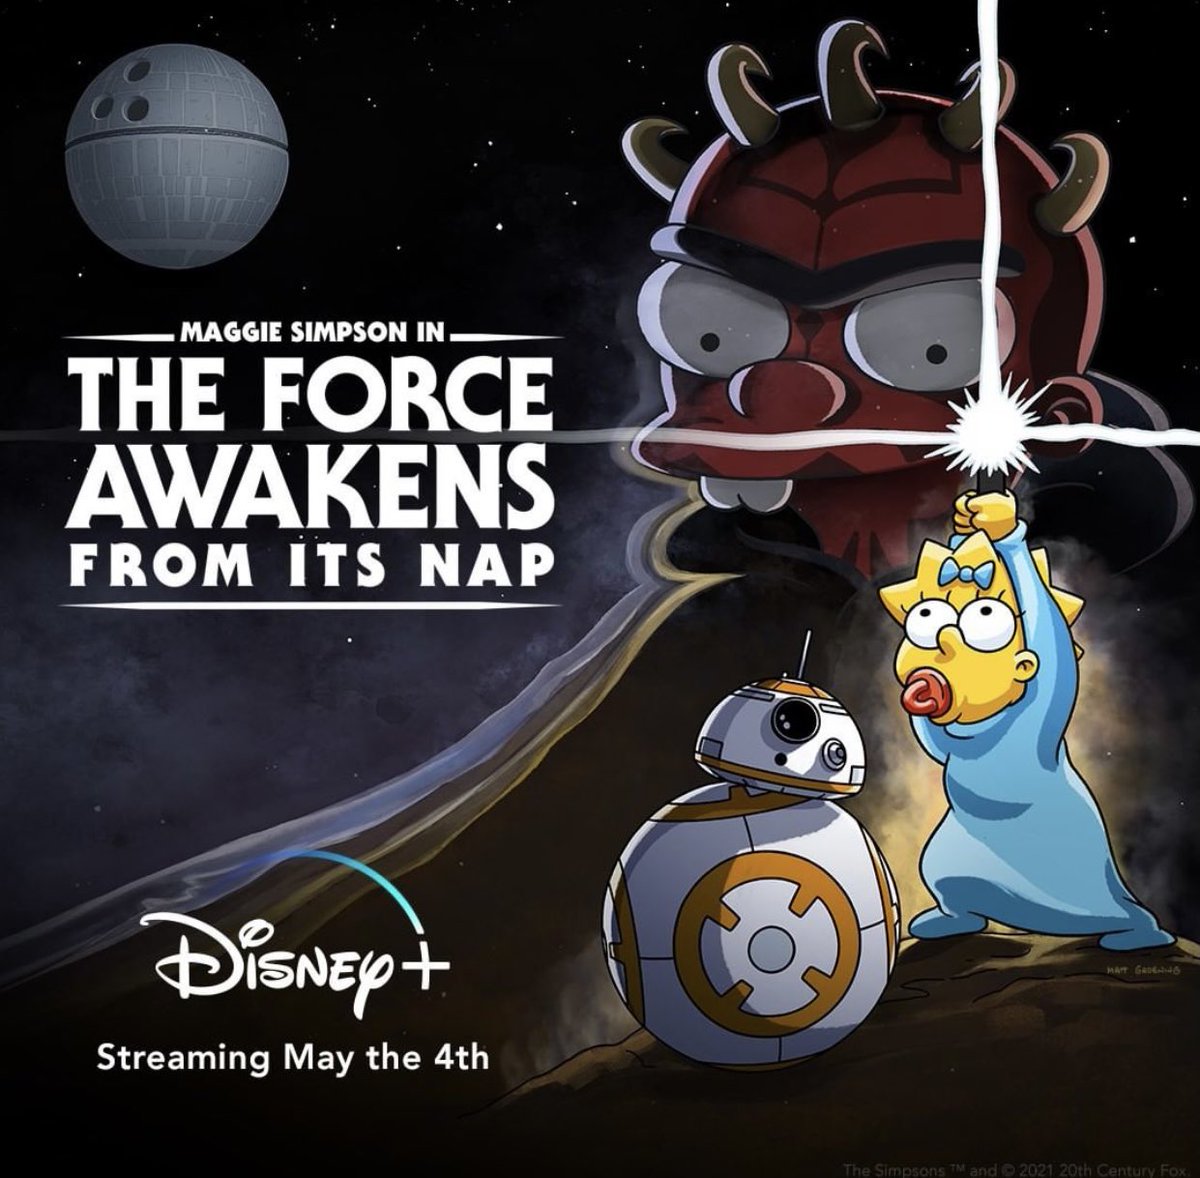 Maggie Simpson in The Force Awakens From its Nap